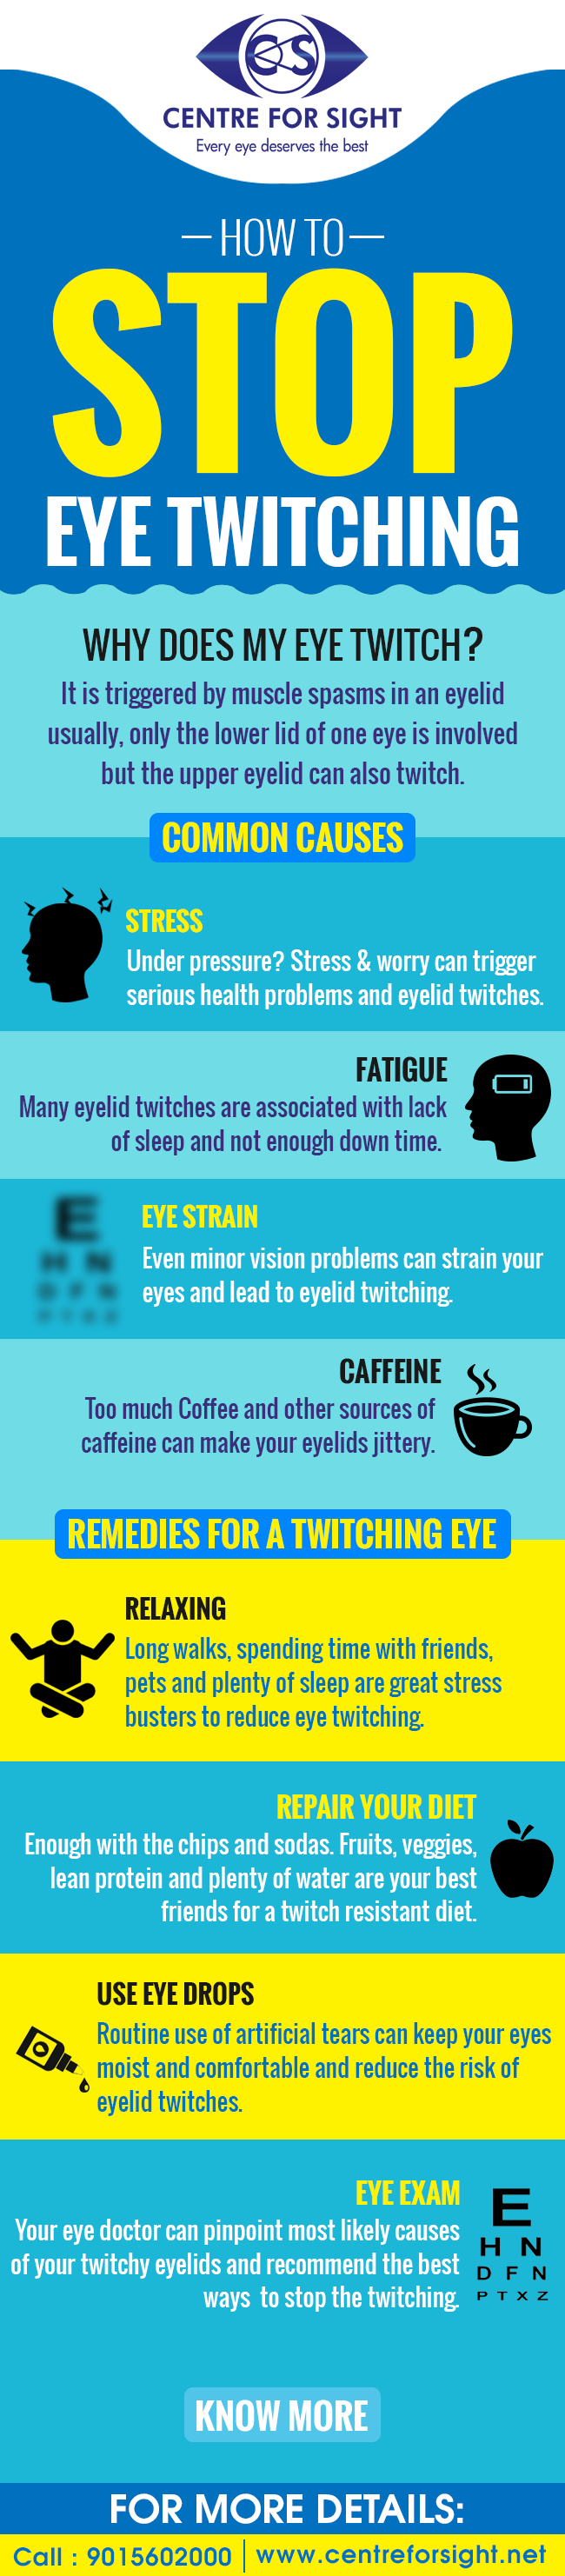 How to stop eye twitching.png  by centreforsight